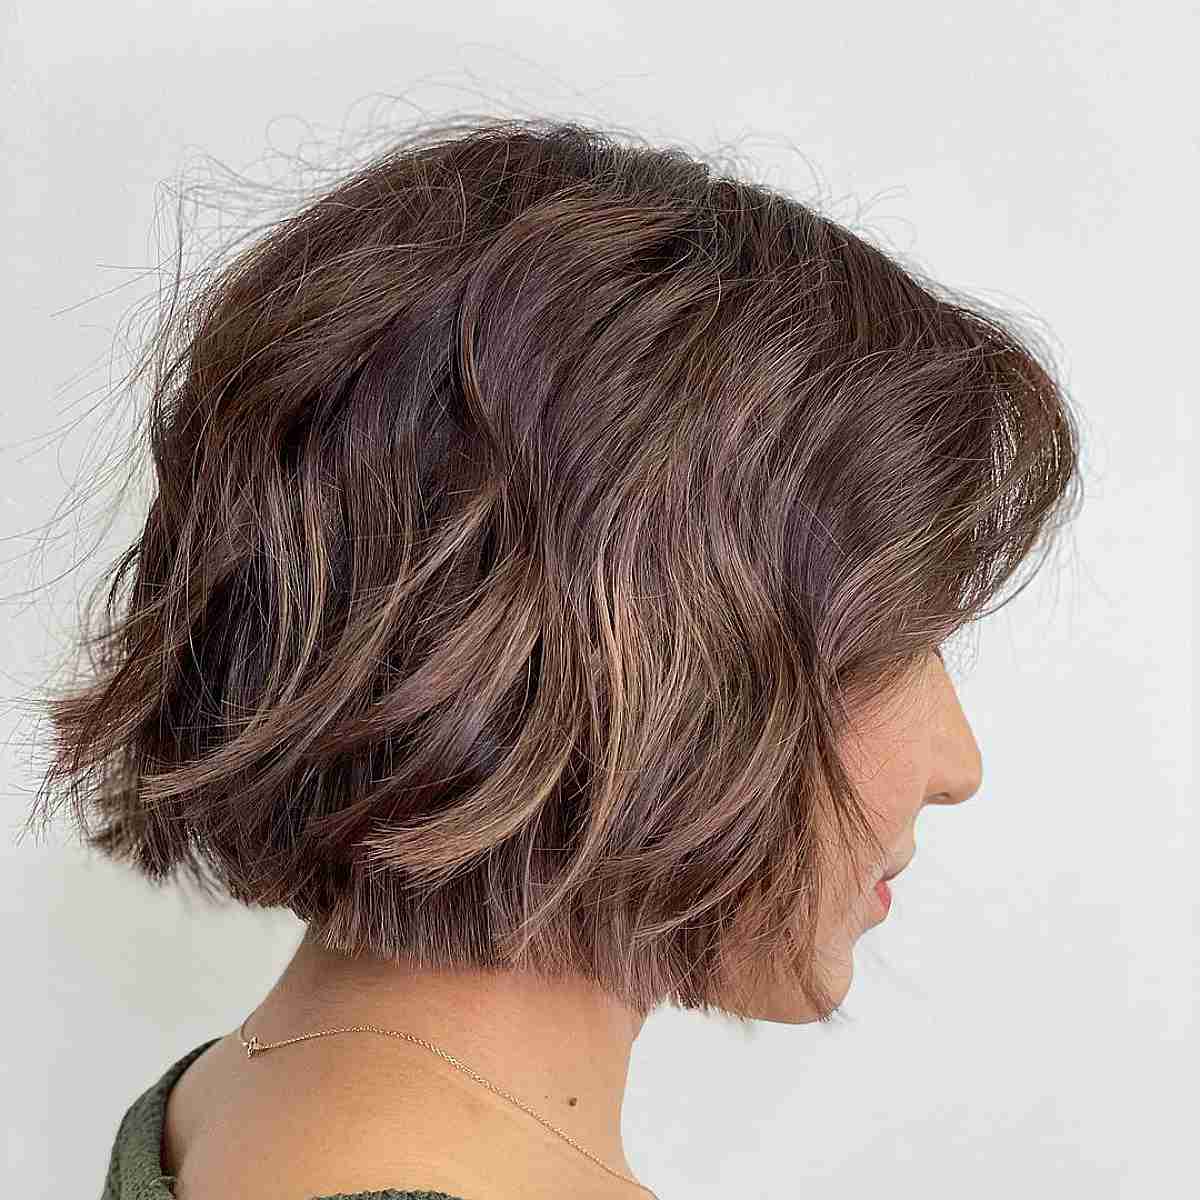 Chin-Length Wavy Blunt Bob with Subtle Layers